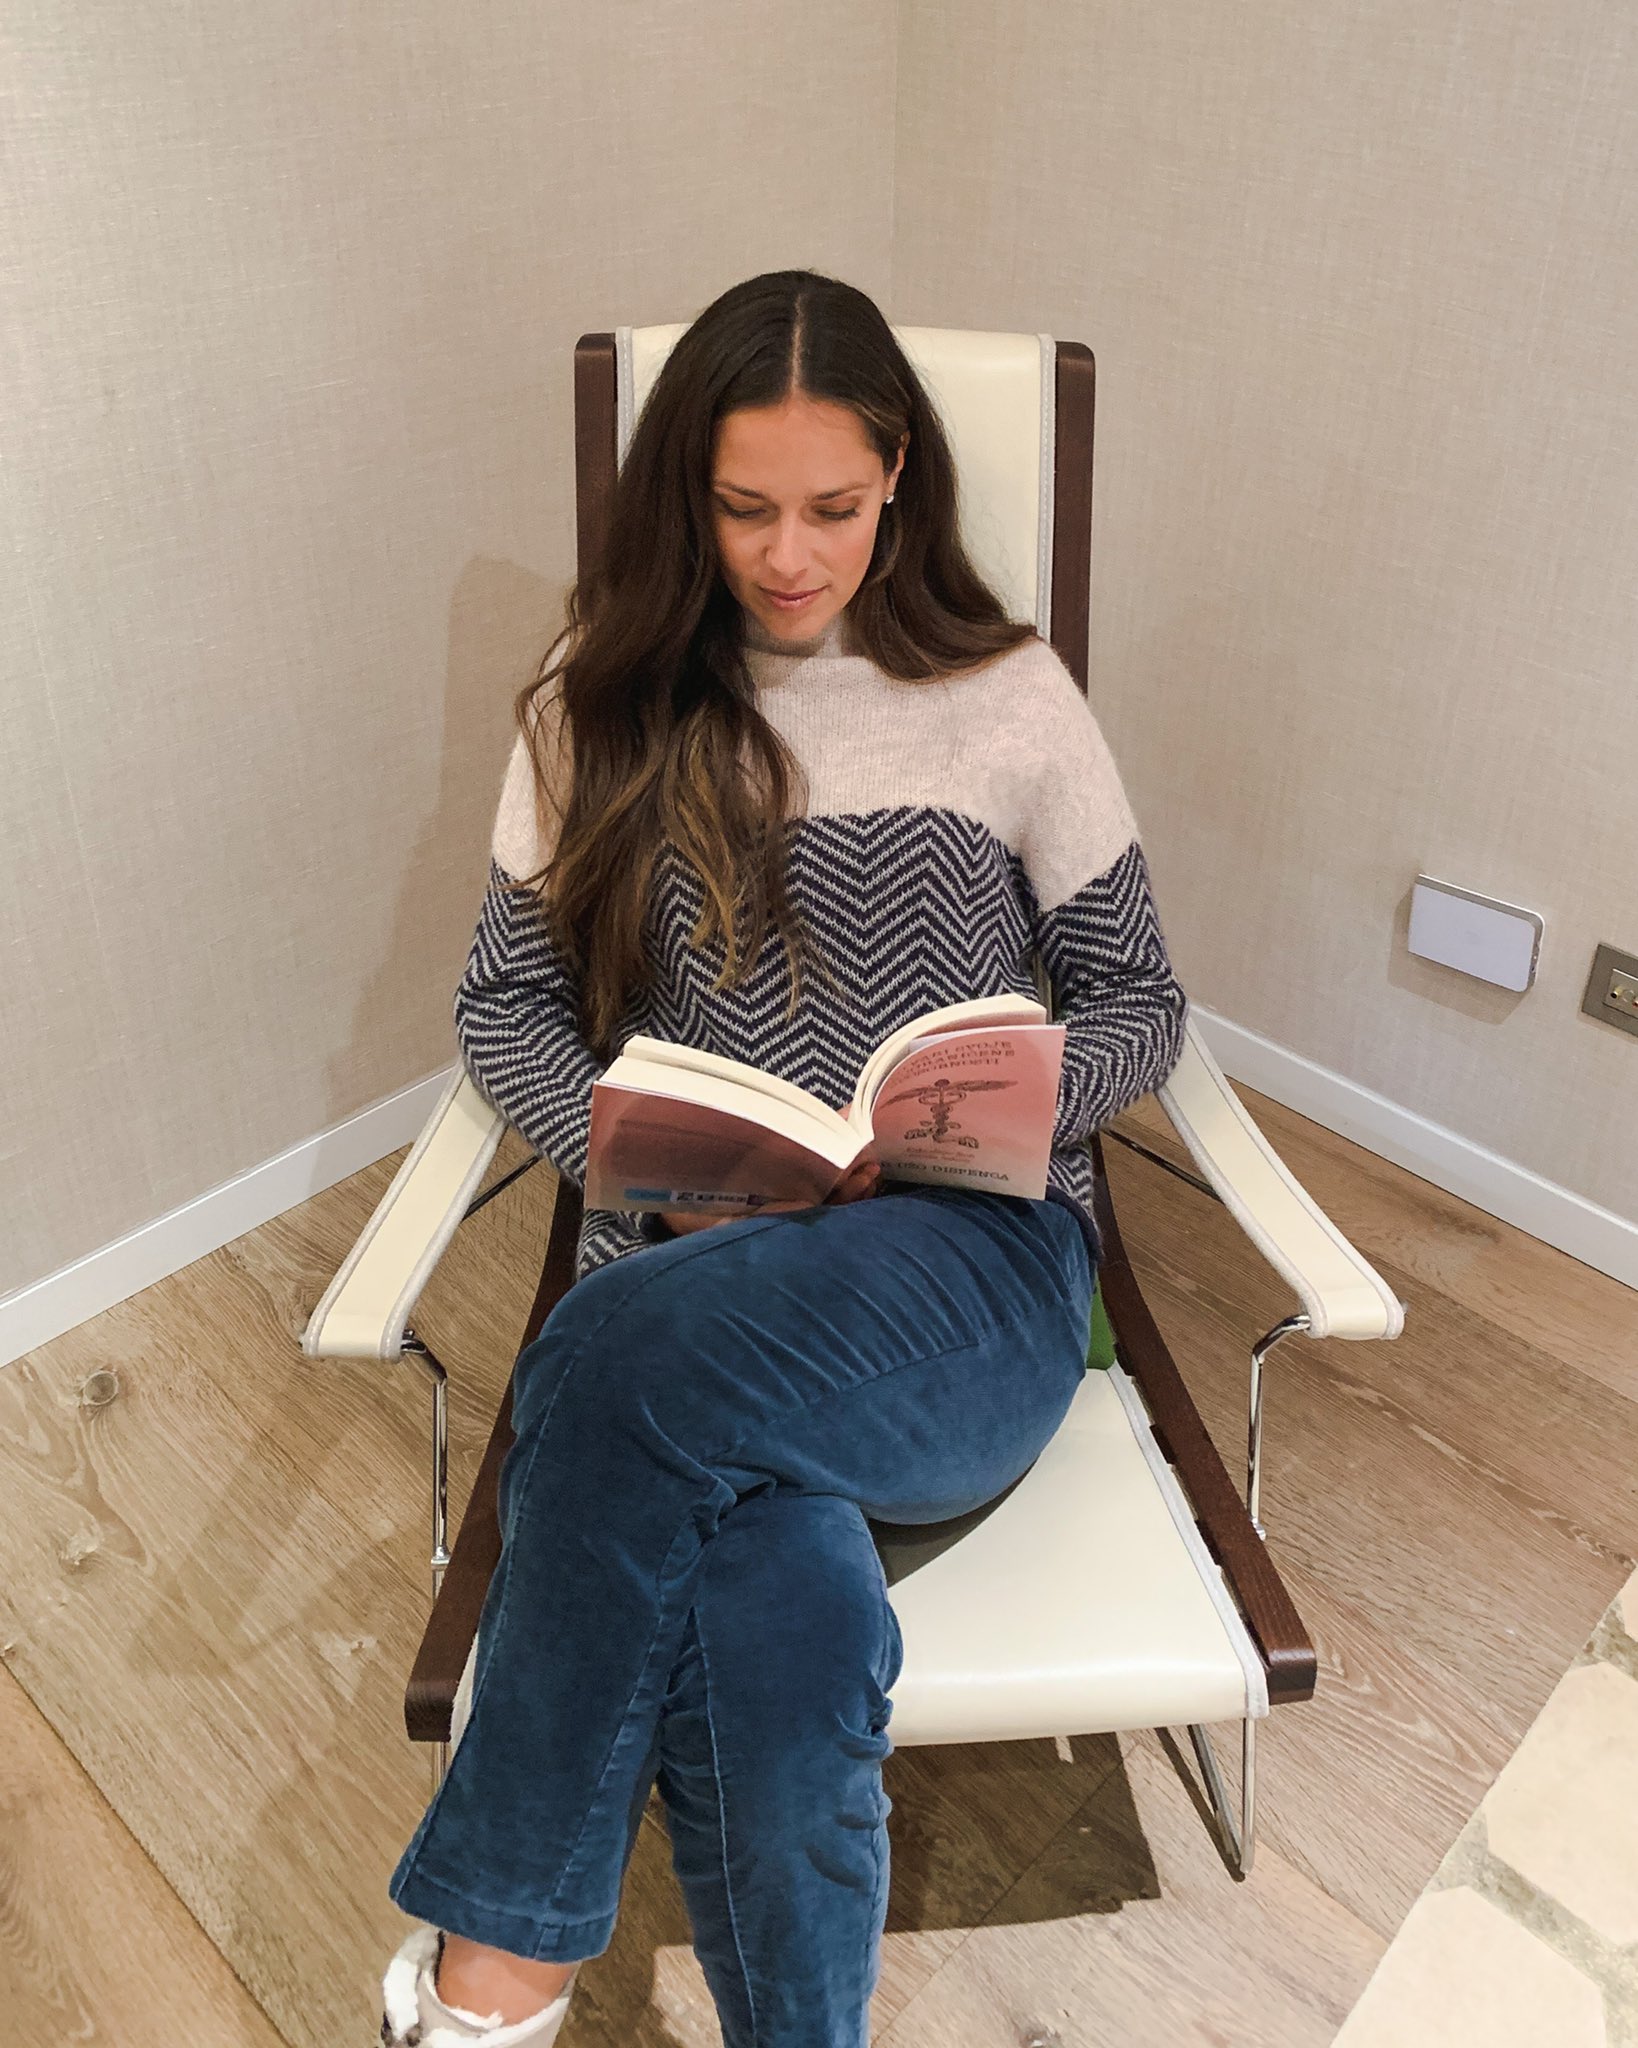 Ana Ivanovic on Twitter: "The leaves are finally falling 🍂 and with it  begins the cozy reading time 📖✨ https://t.co/Puw3wOjj9u" / Twitter